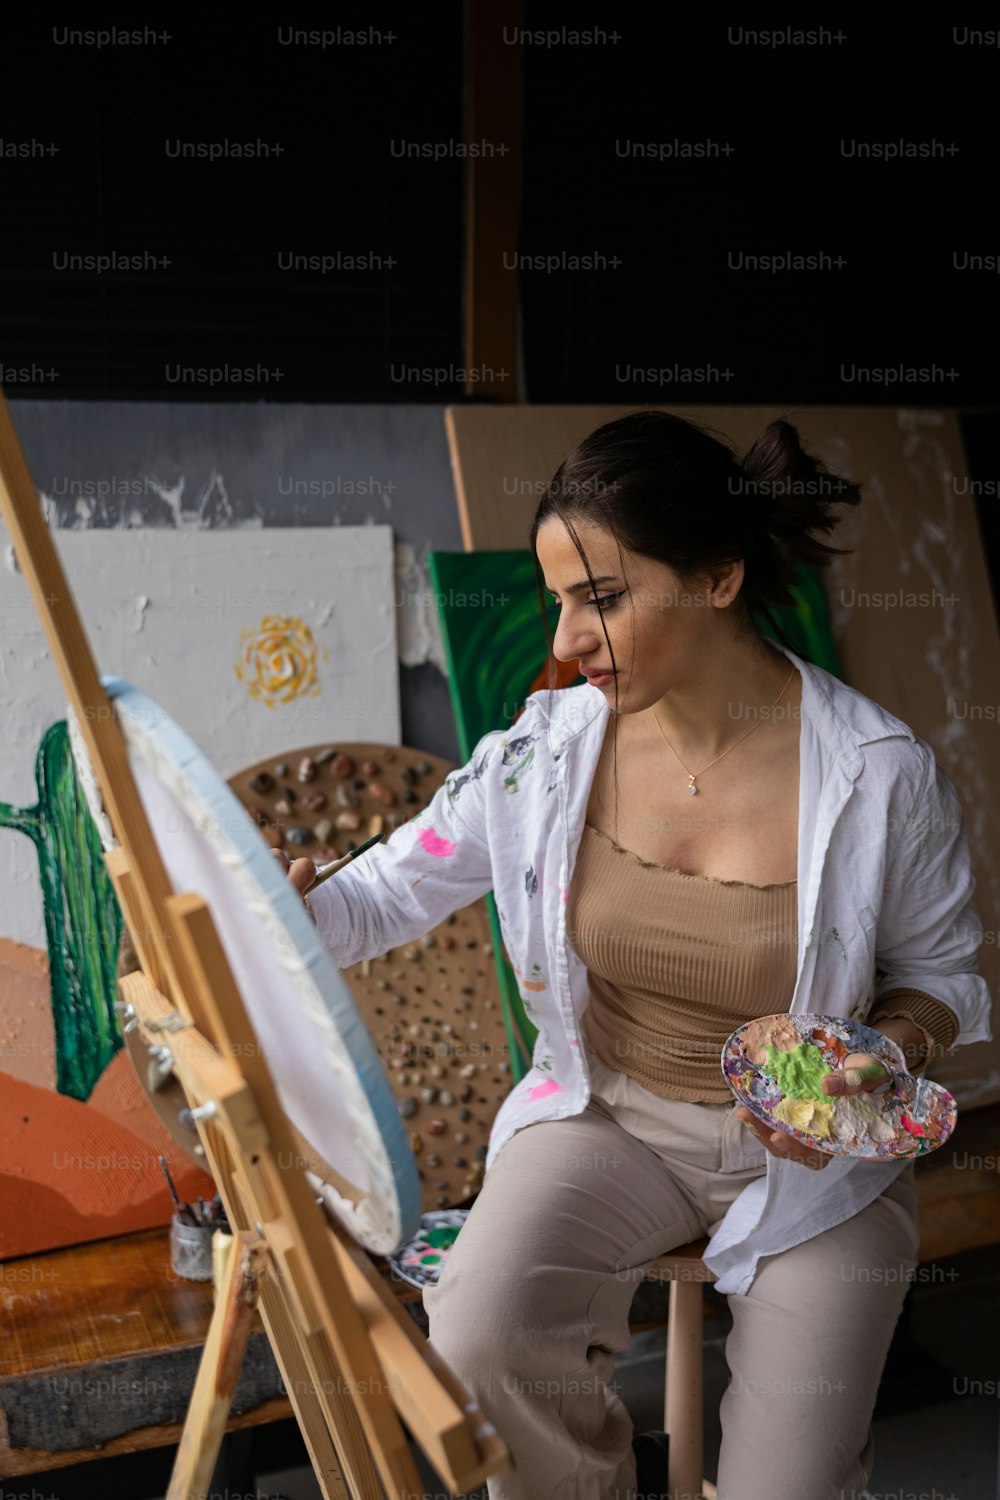 a woman sitting in front of a easel holding a plate of food